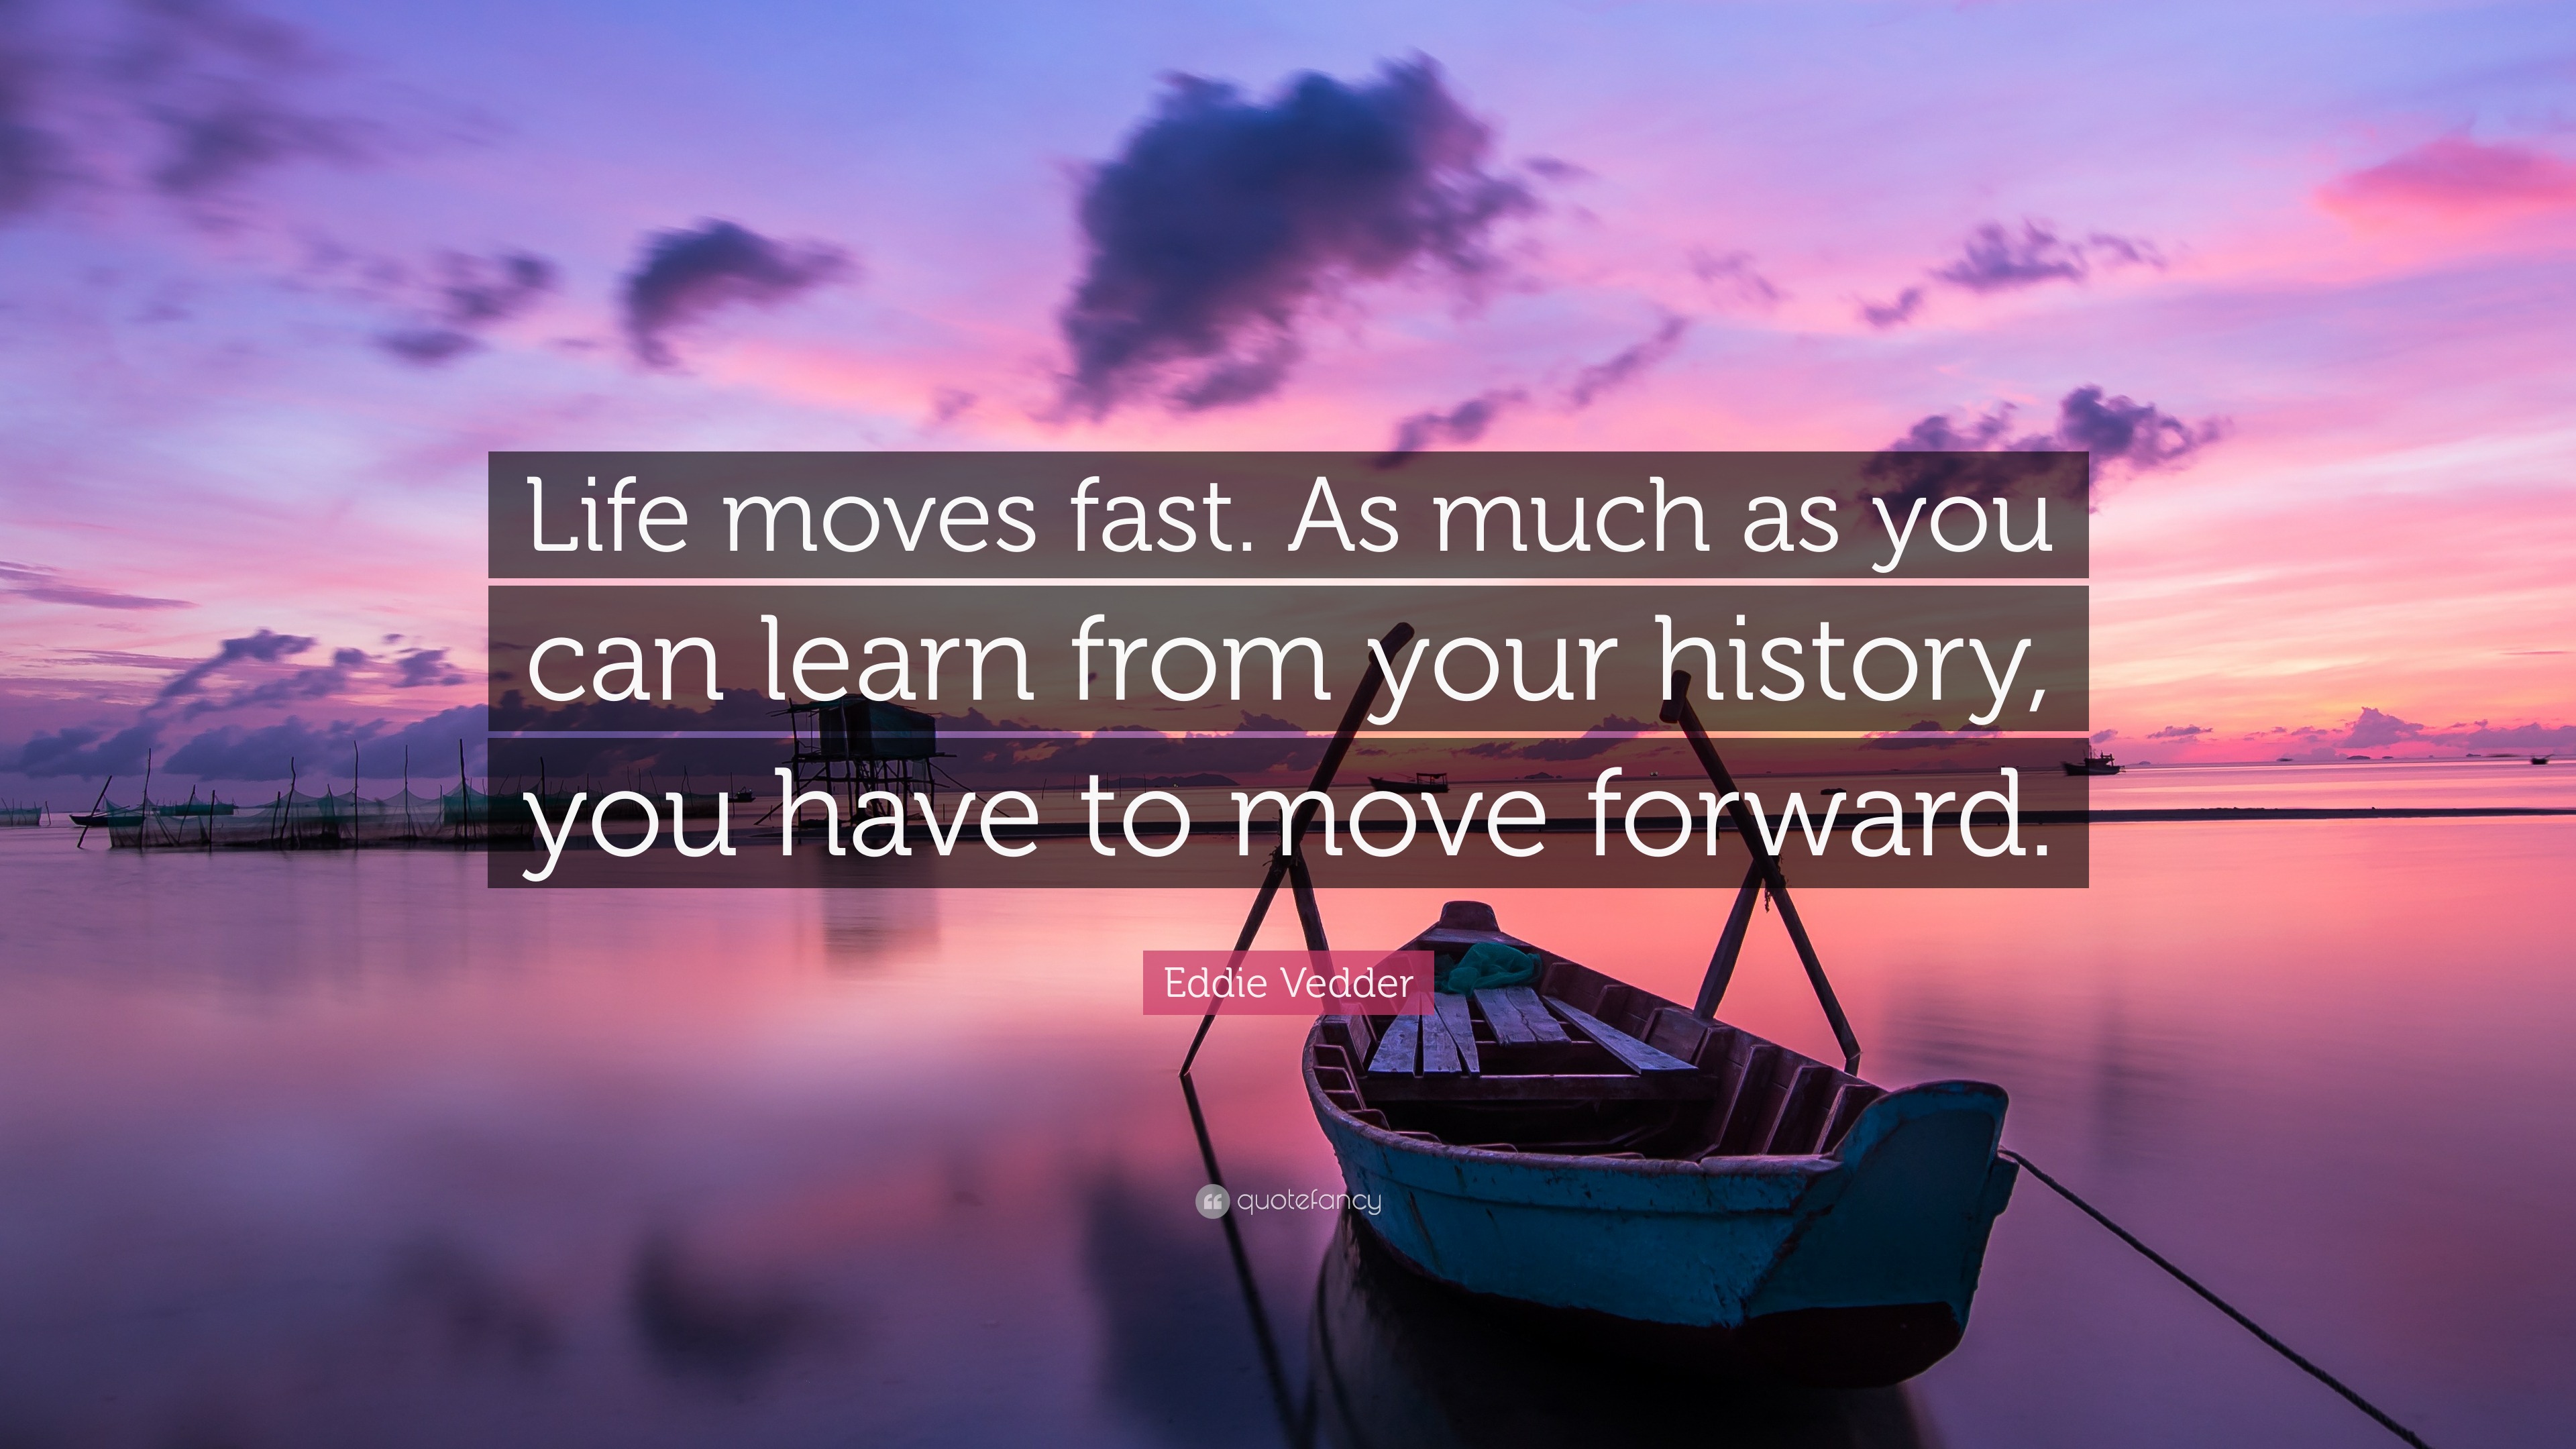 life moves fast